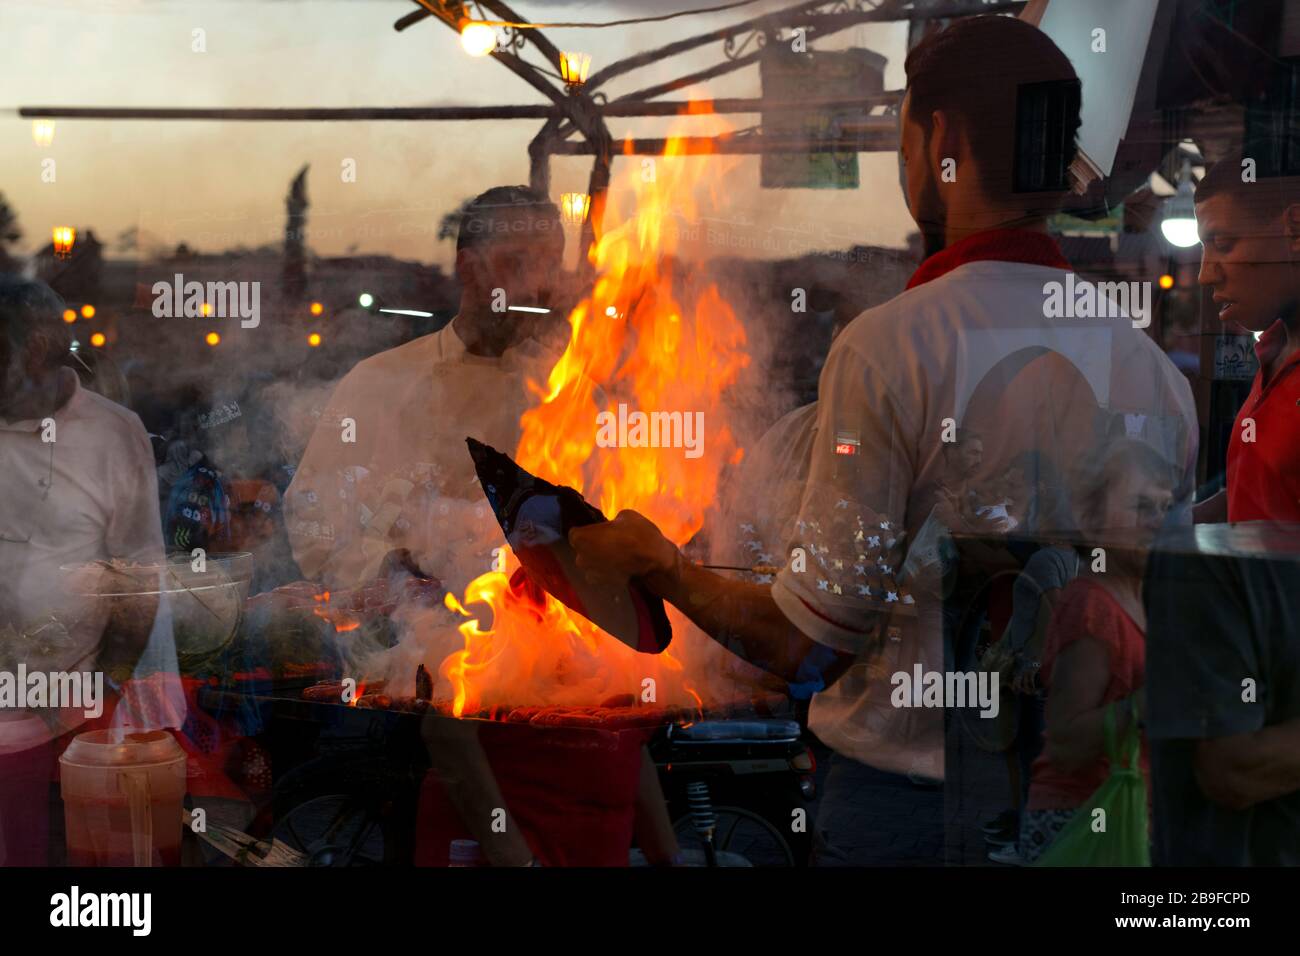 Busy evening scene of Moroccan men cooking barbecue dinner on an open fire at the famous Djemaa el Fna square, November 6, 2017, Marrakech, Morocco. D Stock Photo